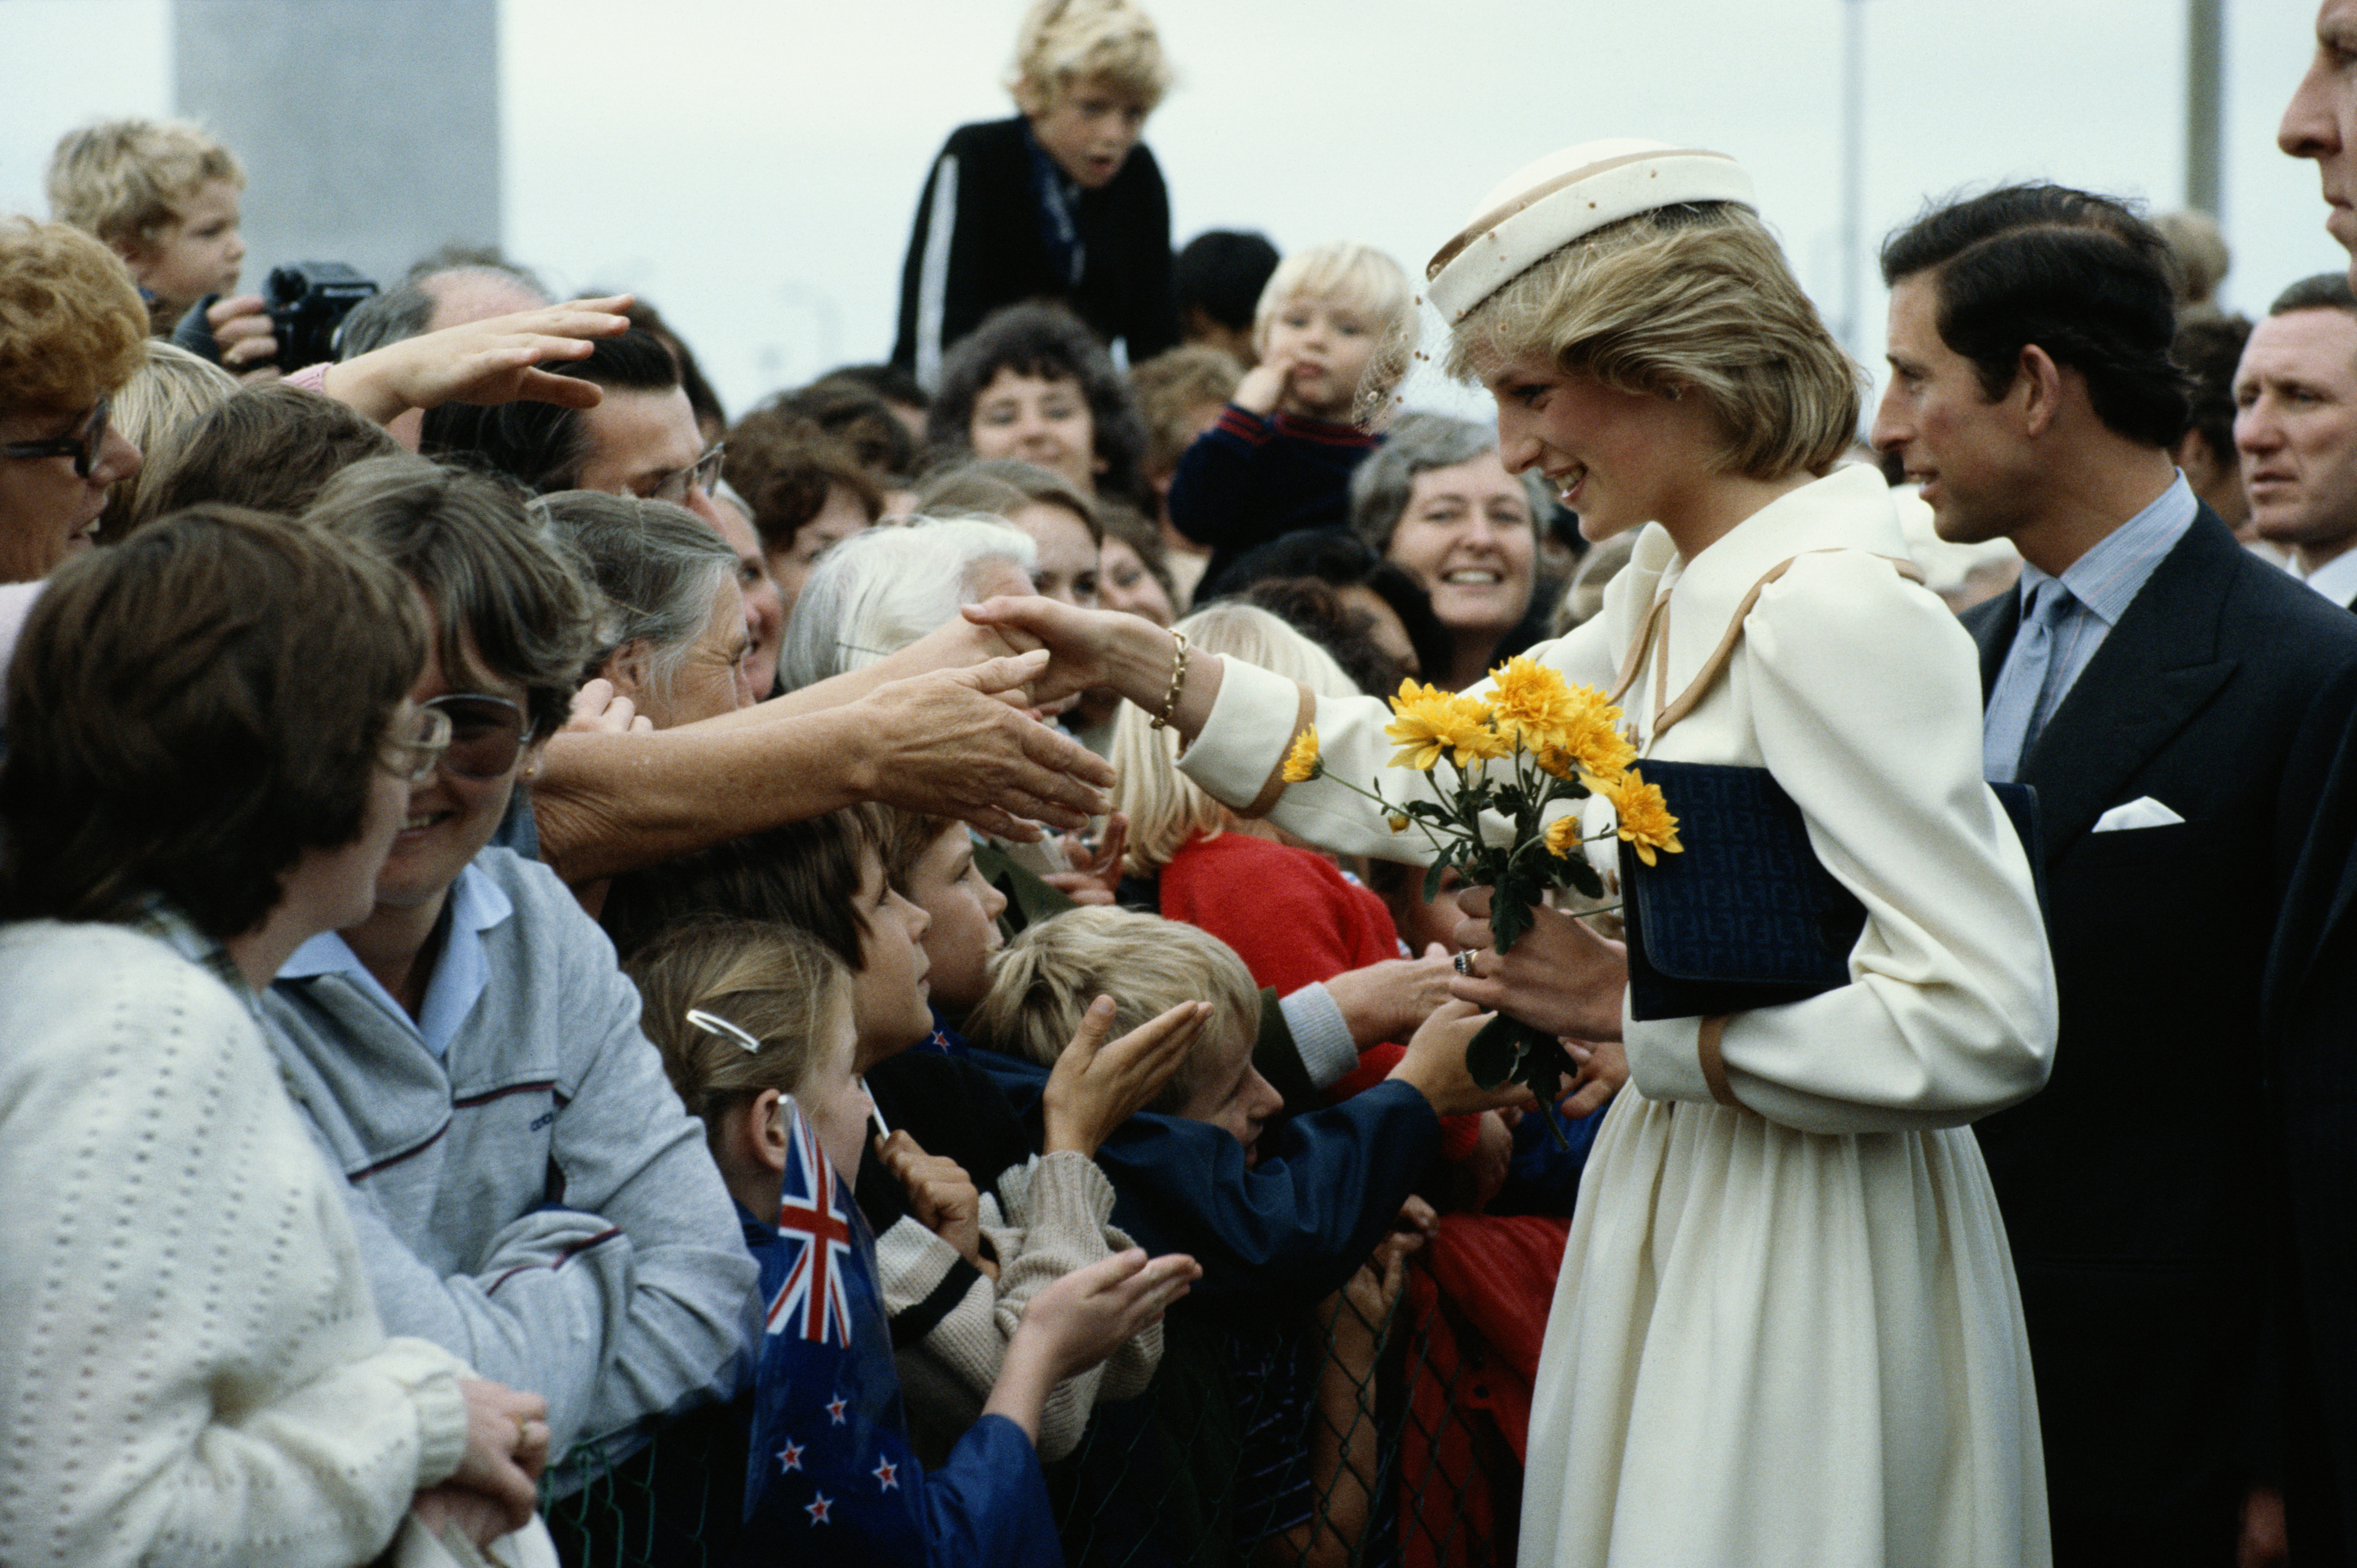 Late Princess Diana and King Charles III meeting the crowd on April 17, 1983, during their arrival in Auckland, New Zealand | Source: Getty Images